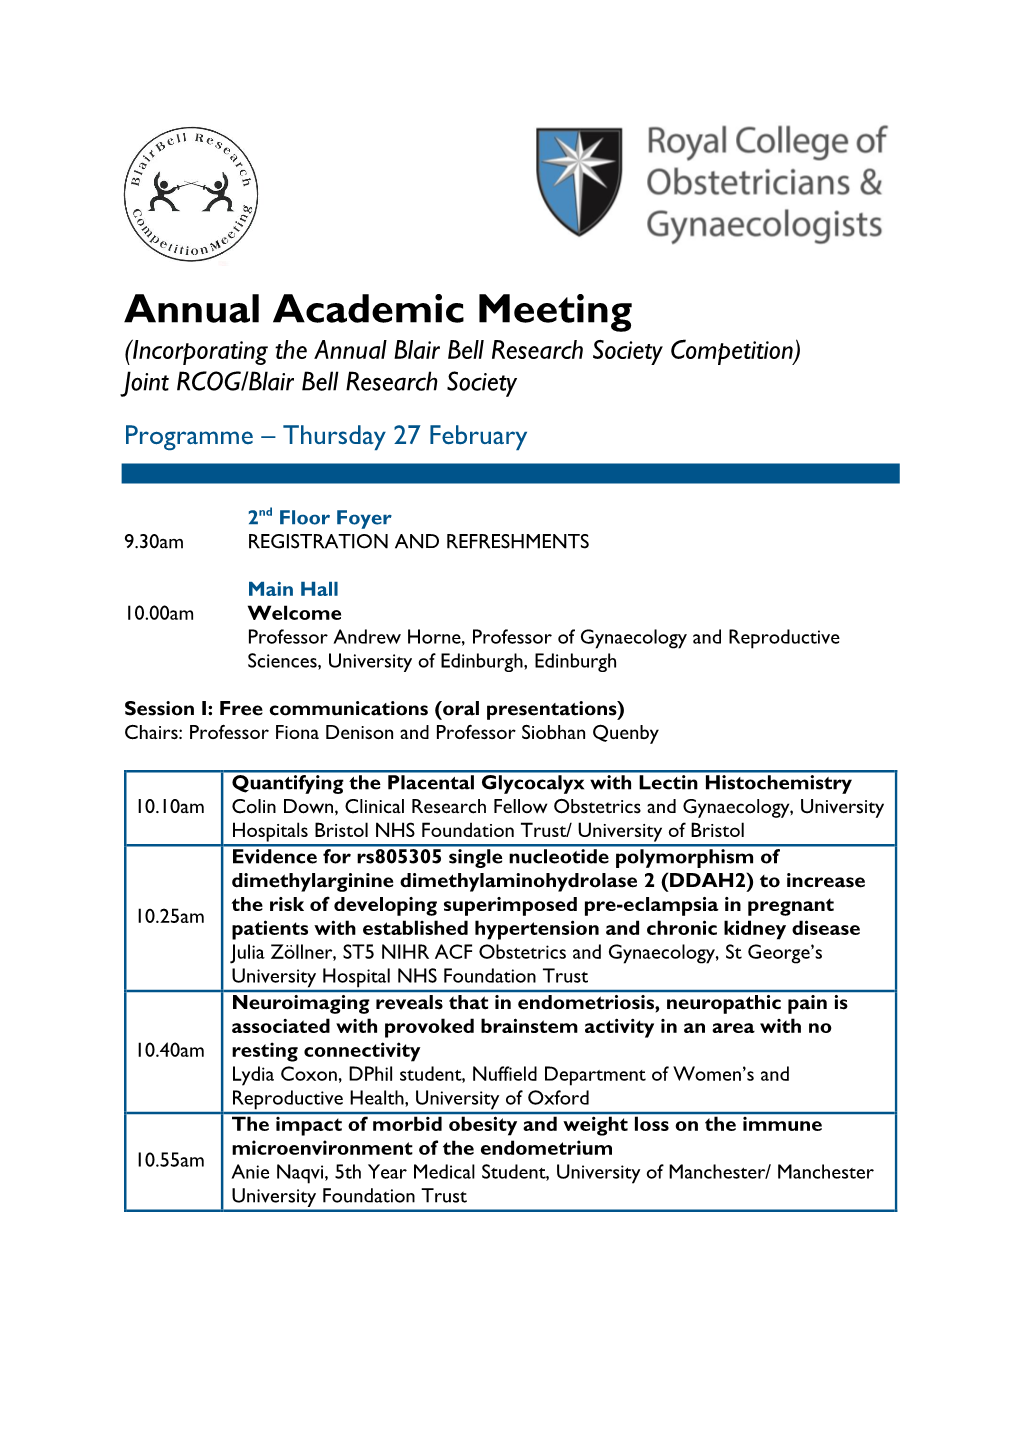 Annual Academic Meeting (Incorporating the Annual Blair Bell Research Society Competition) Joint RCOG/Blair Bell Research Society